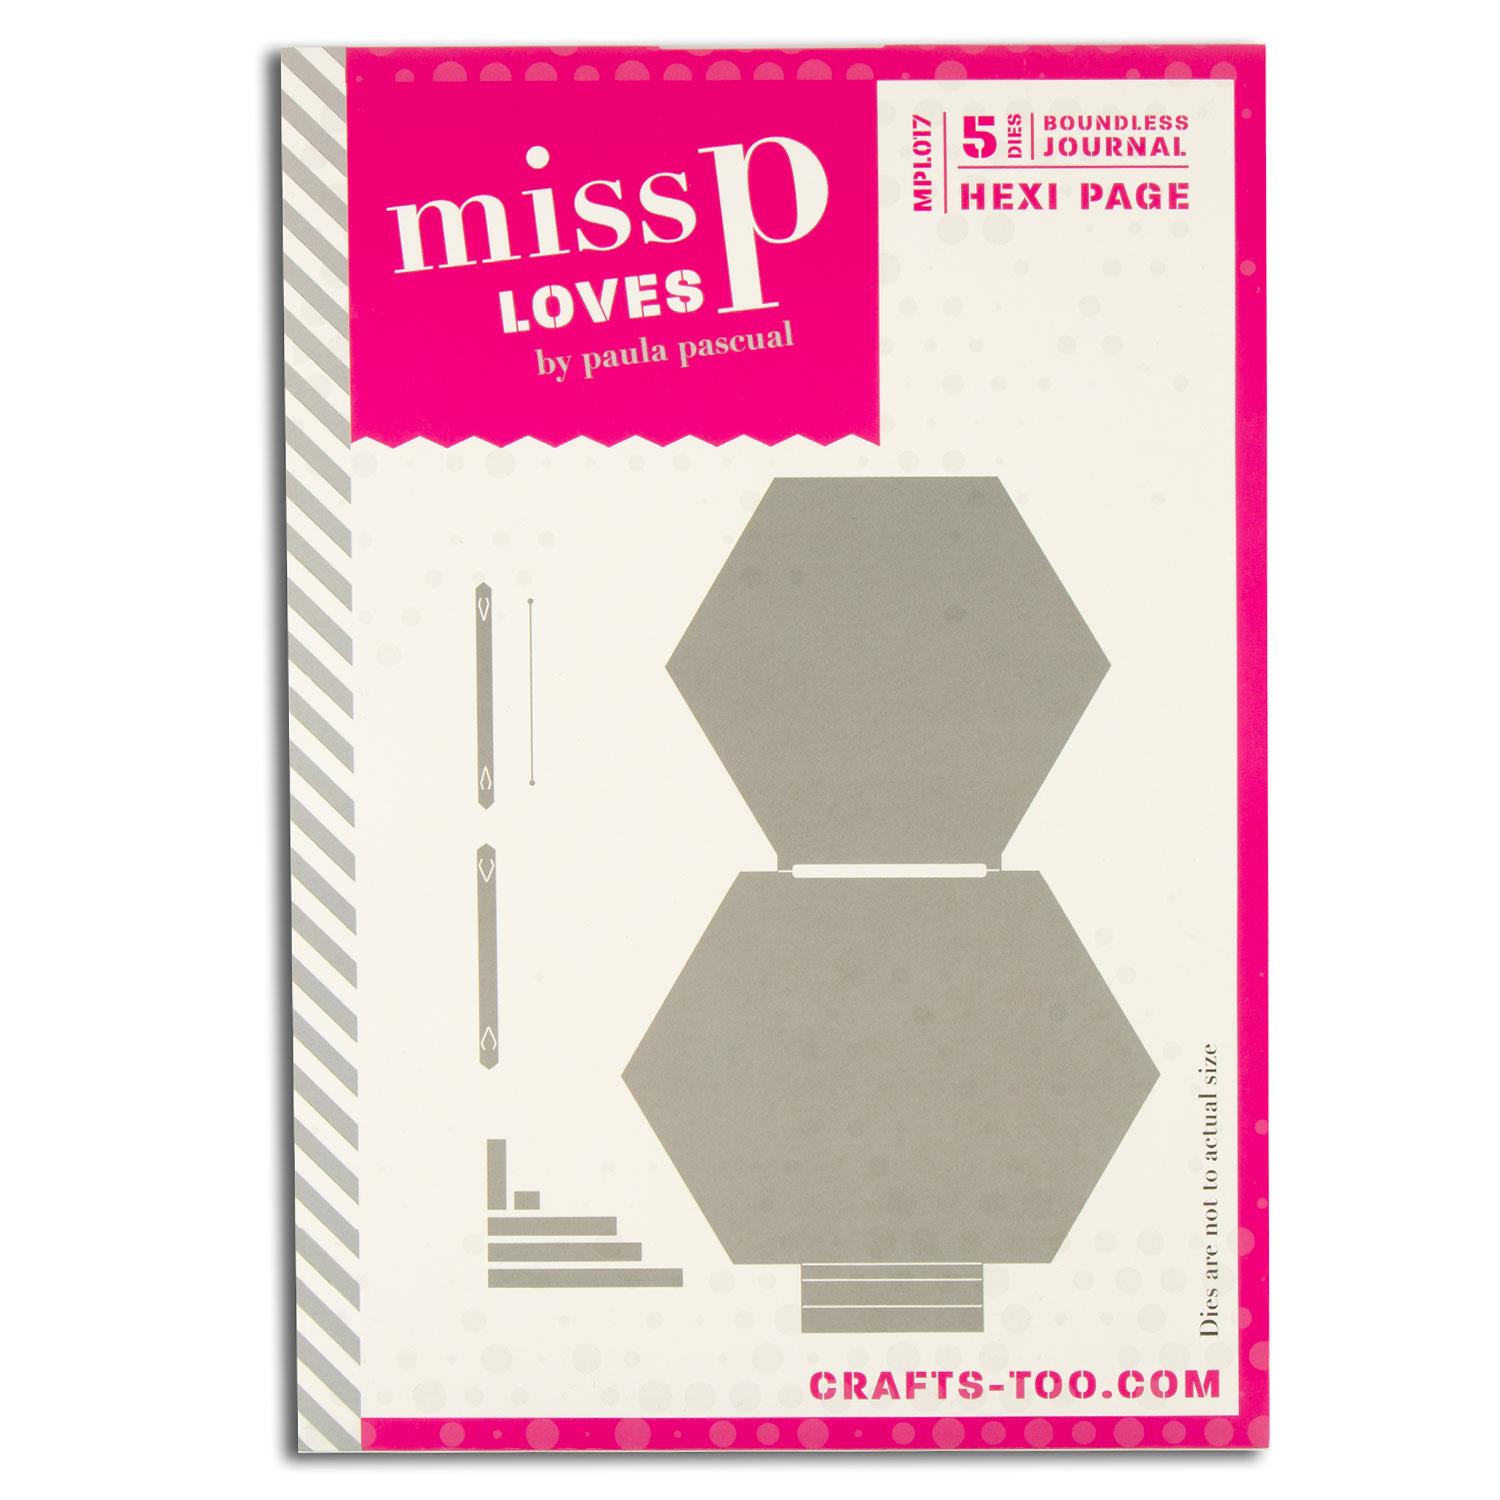 Miss P Loves Boundless Journal - Hexi Page (5pcs)